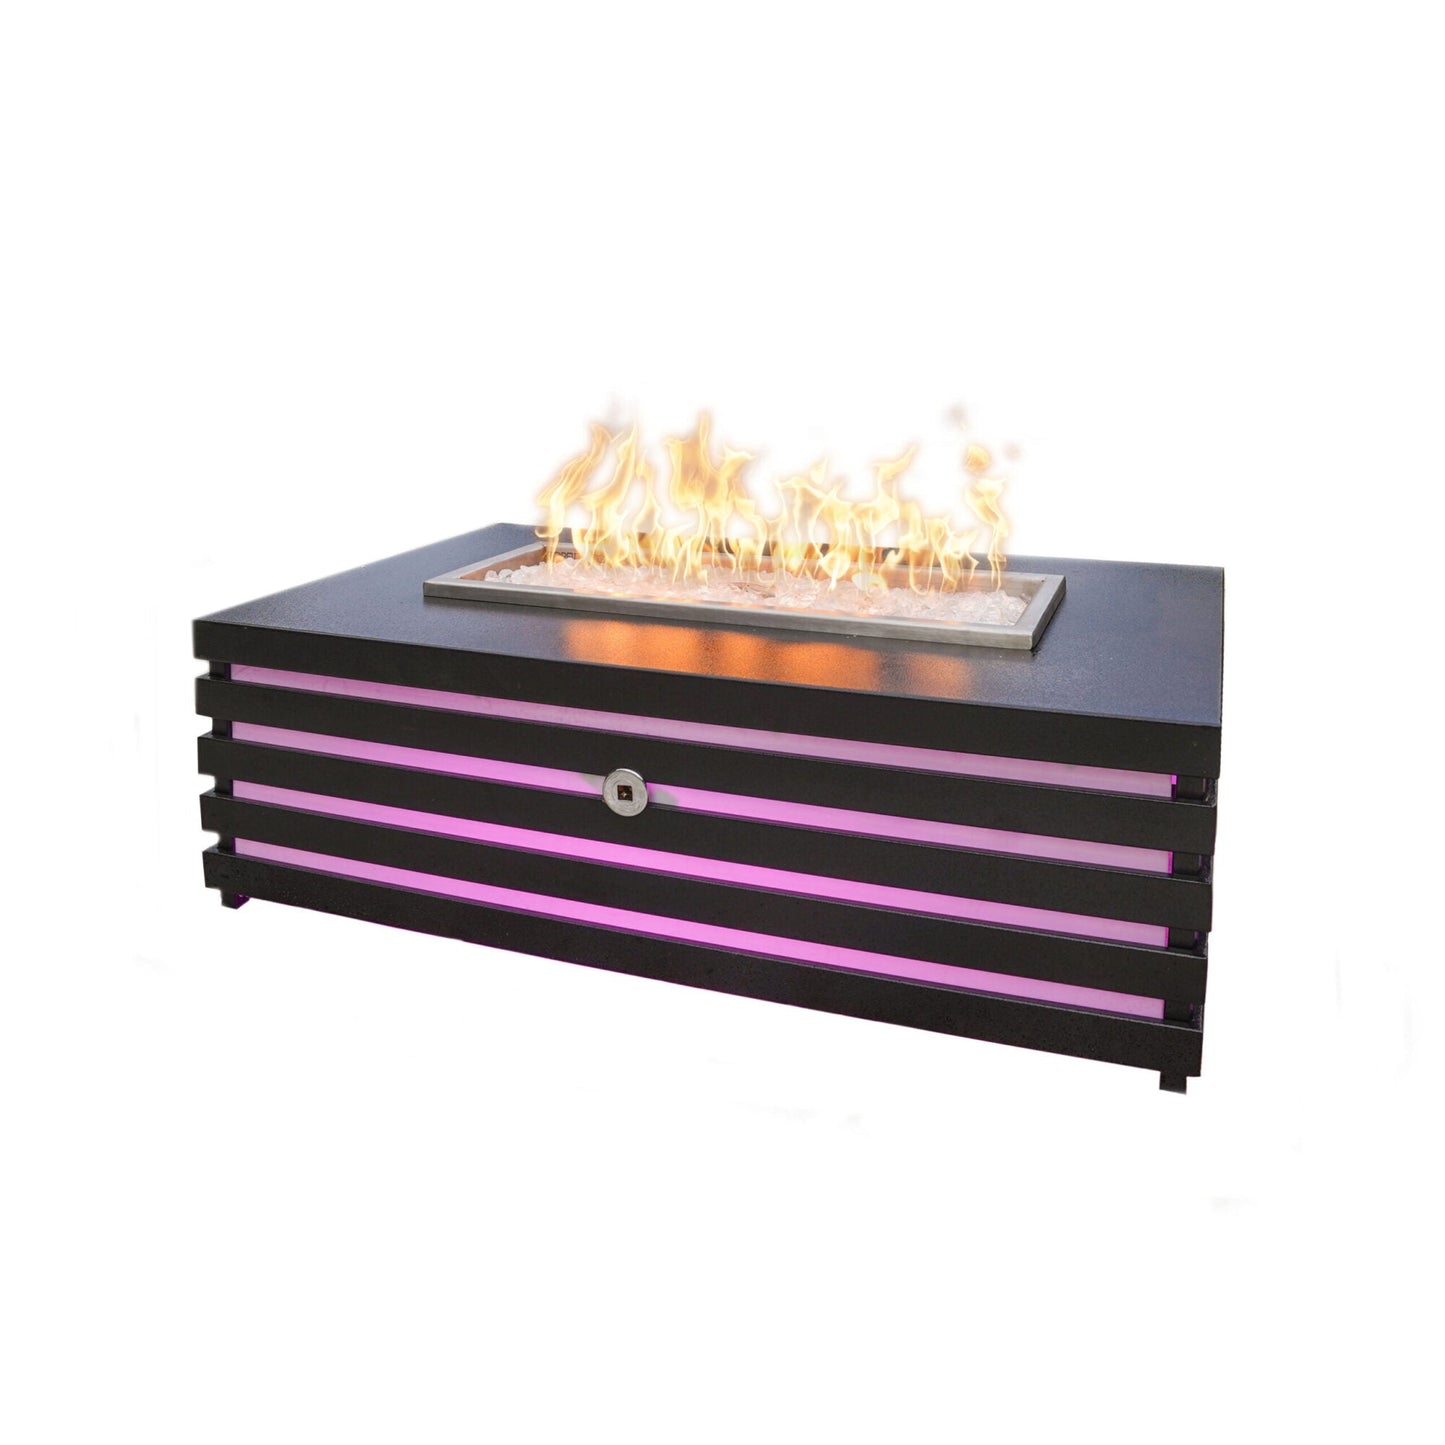 The Outdoor Plus Amina 48" Java Powder Coated Liquid Propane Fire Pit with 12V Electronic Ignition